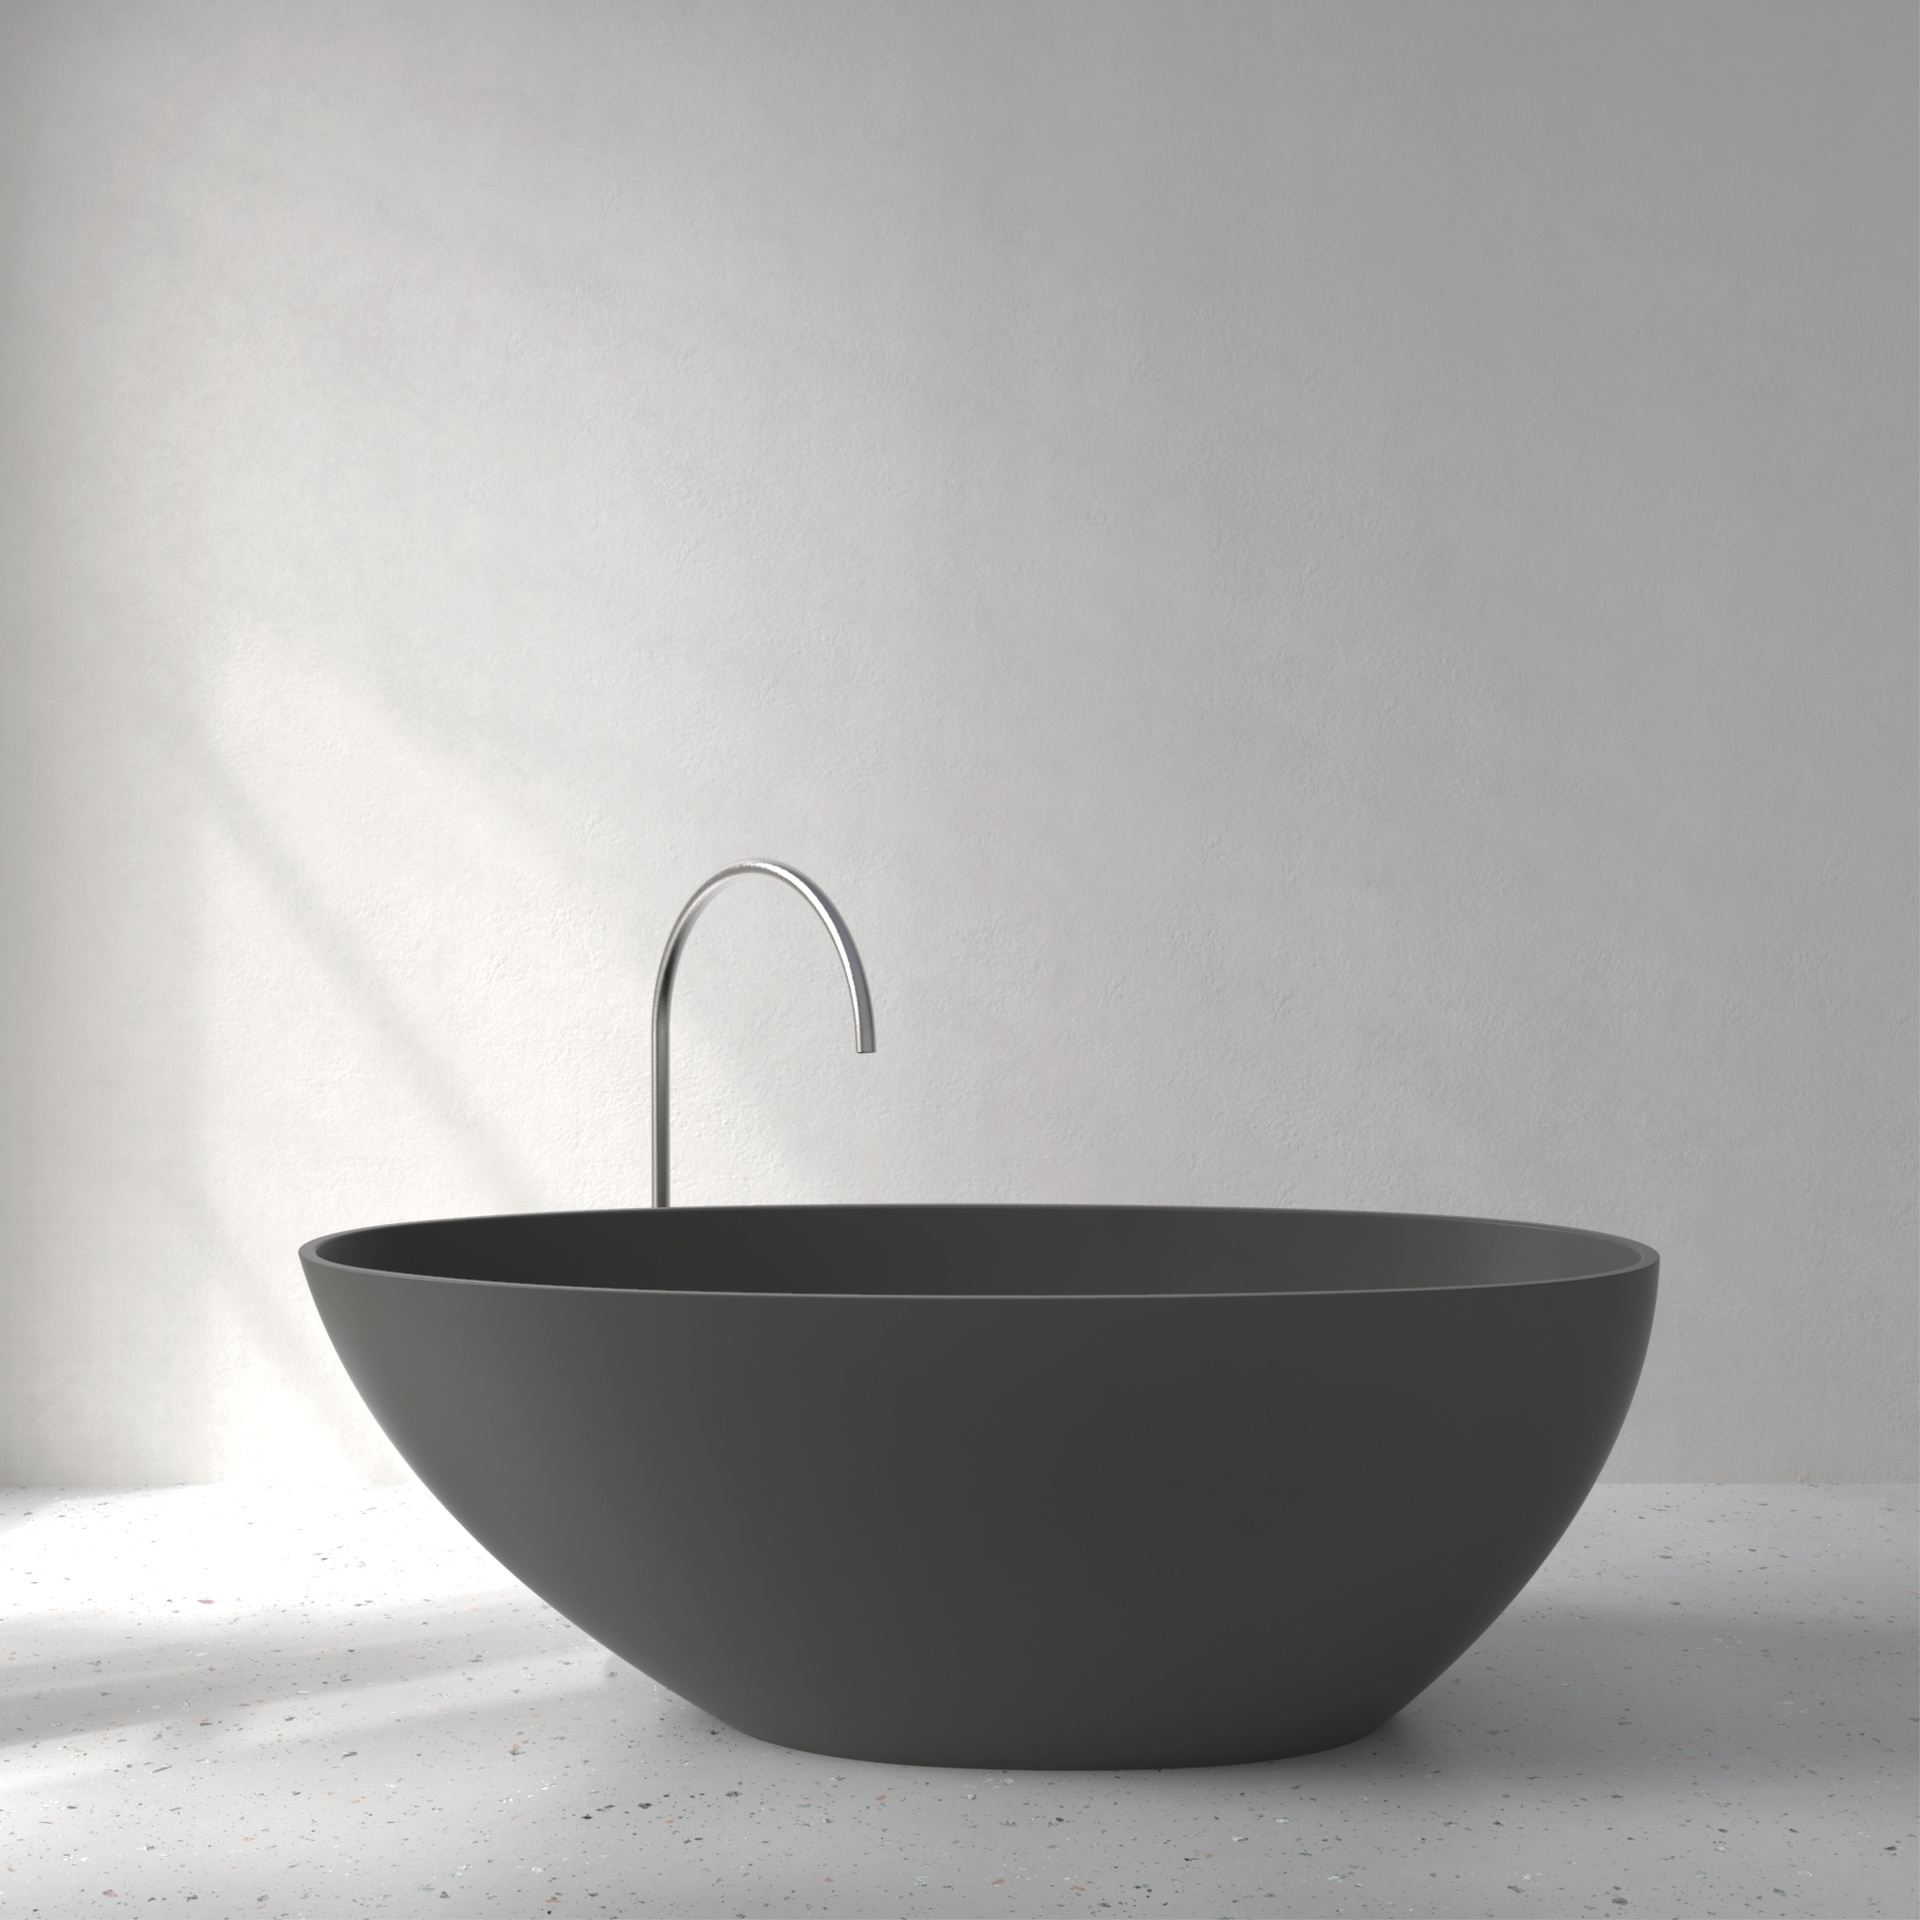 [FEA02-PAGREY] Ease bath in Palette color (Anthracite Grey)